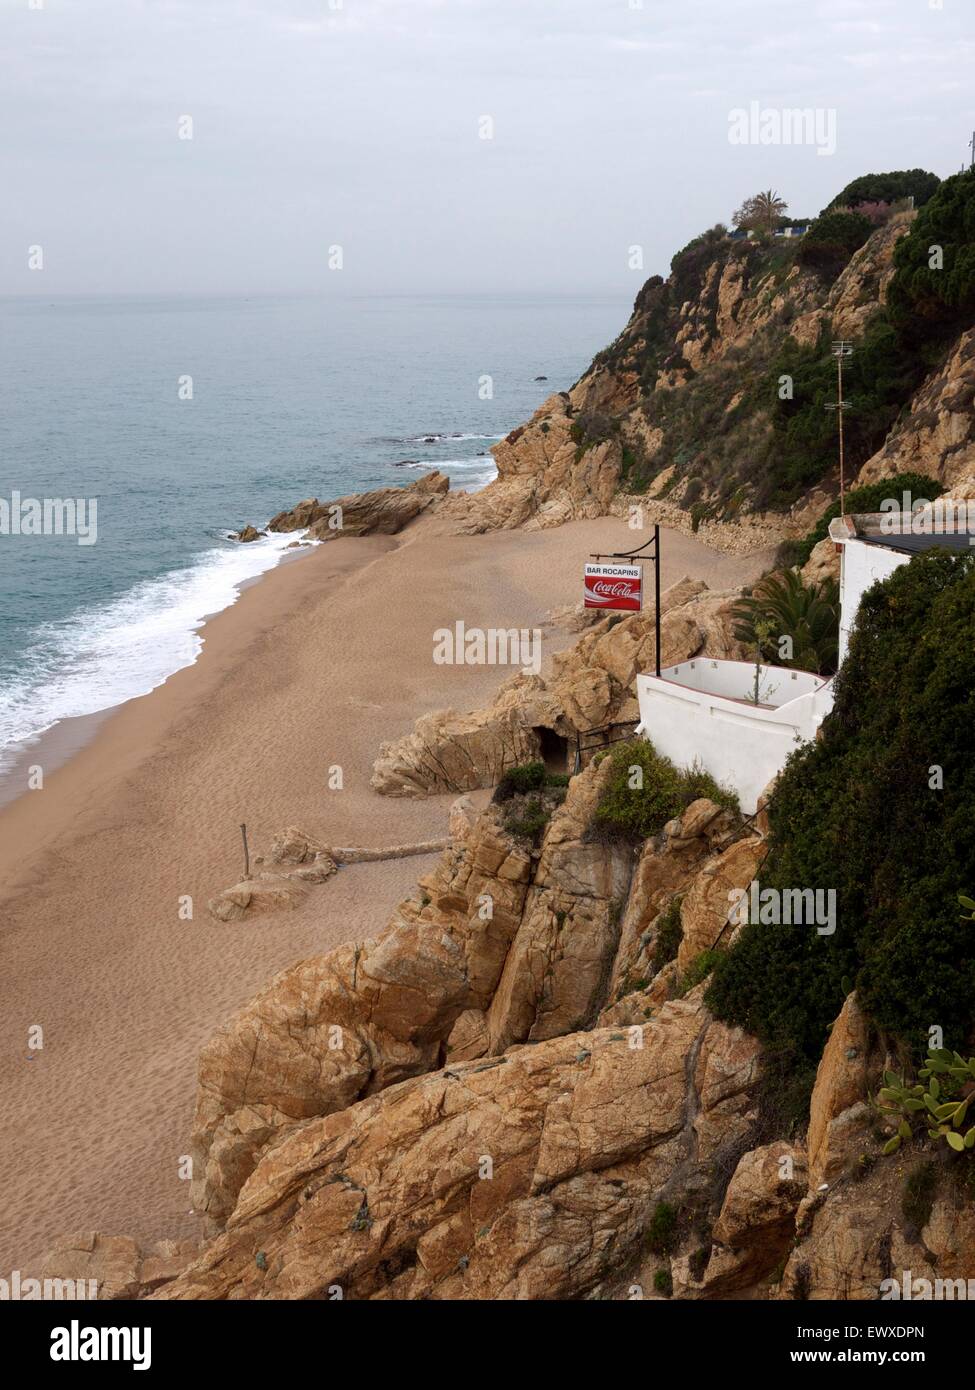 Empty beach in Spain on a gloomy looking day Stock Photo